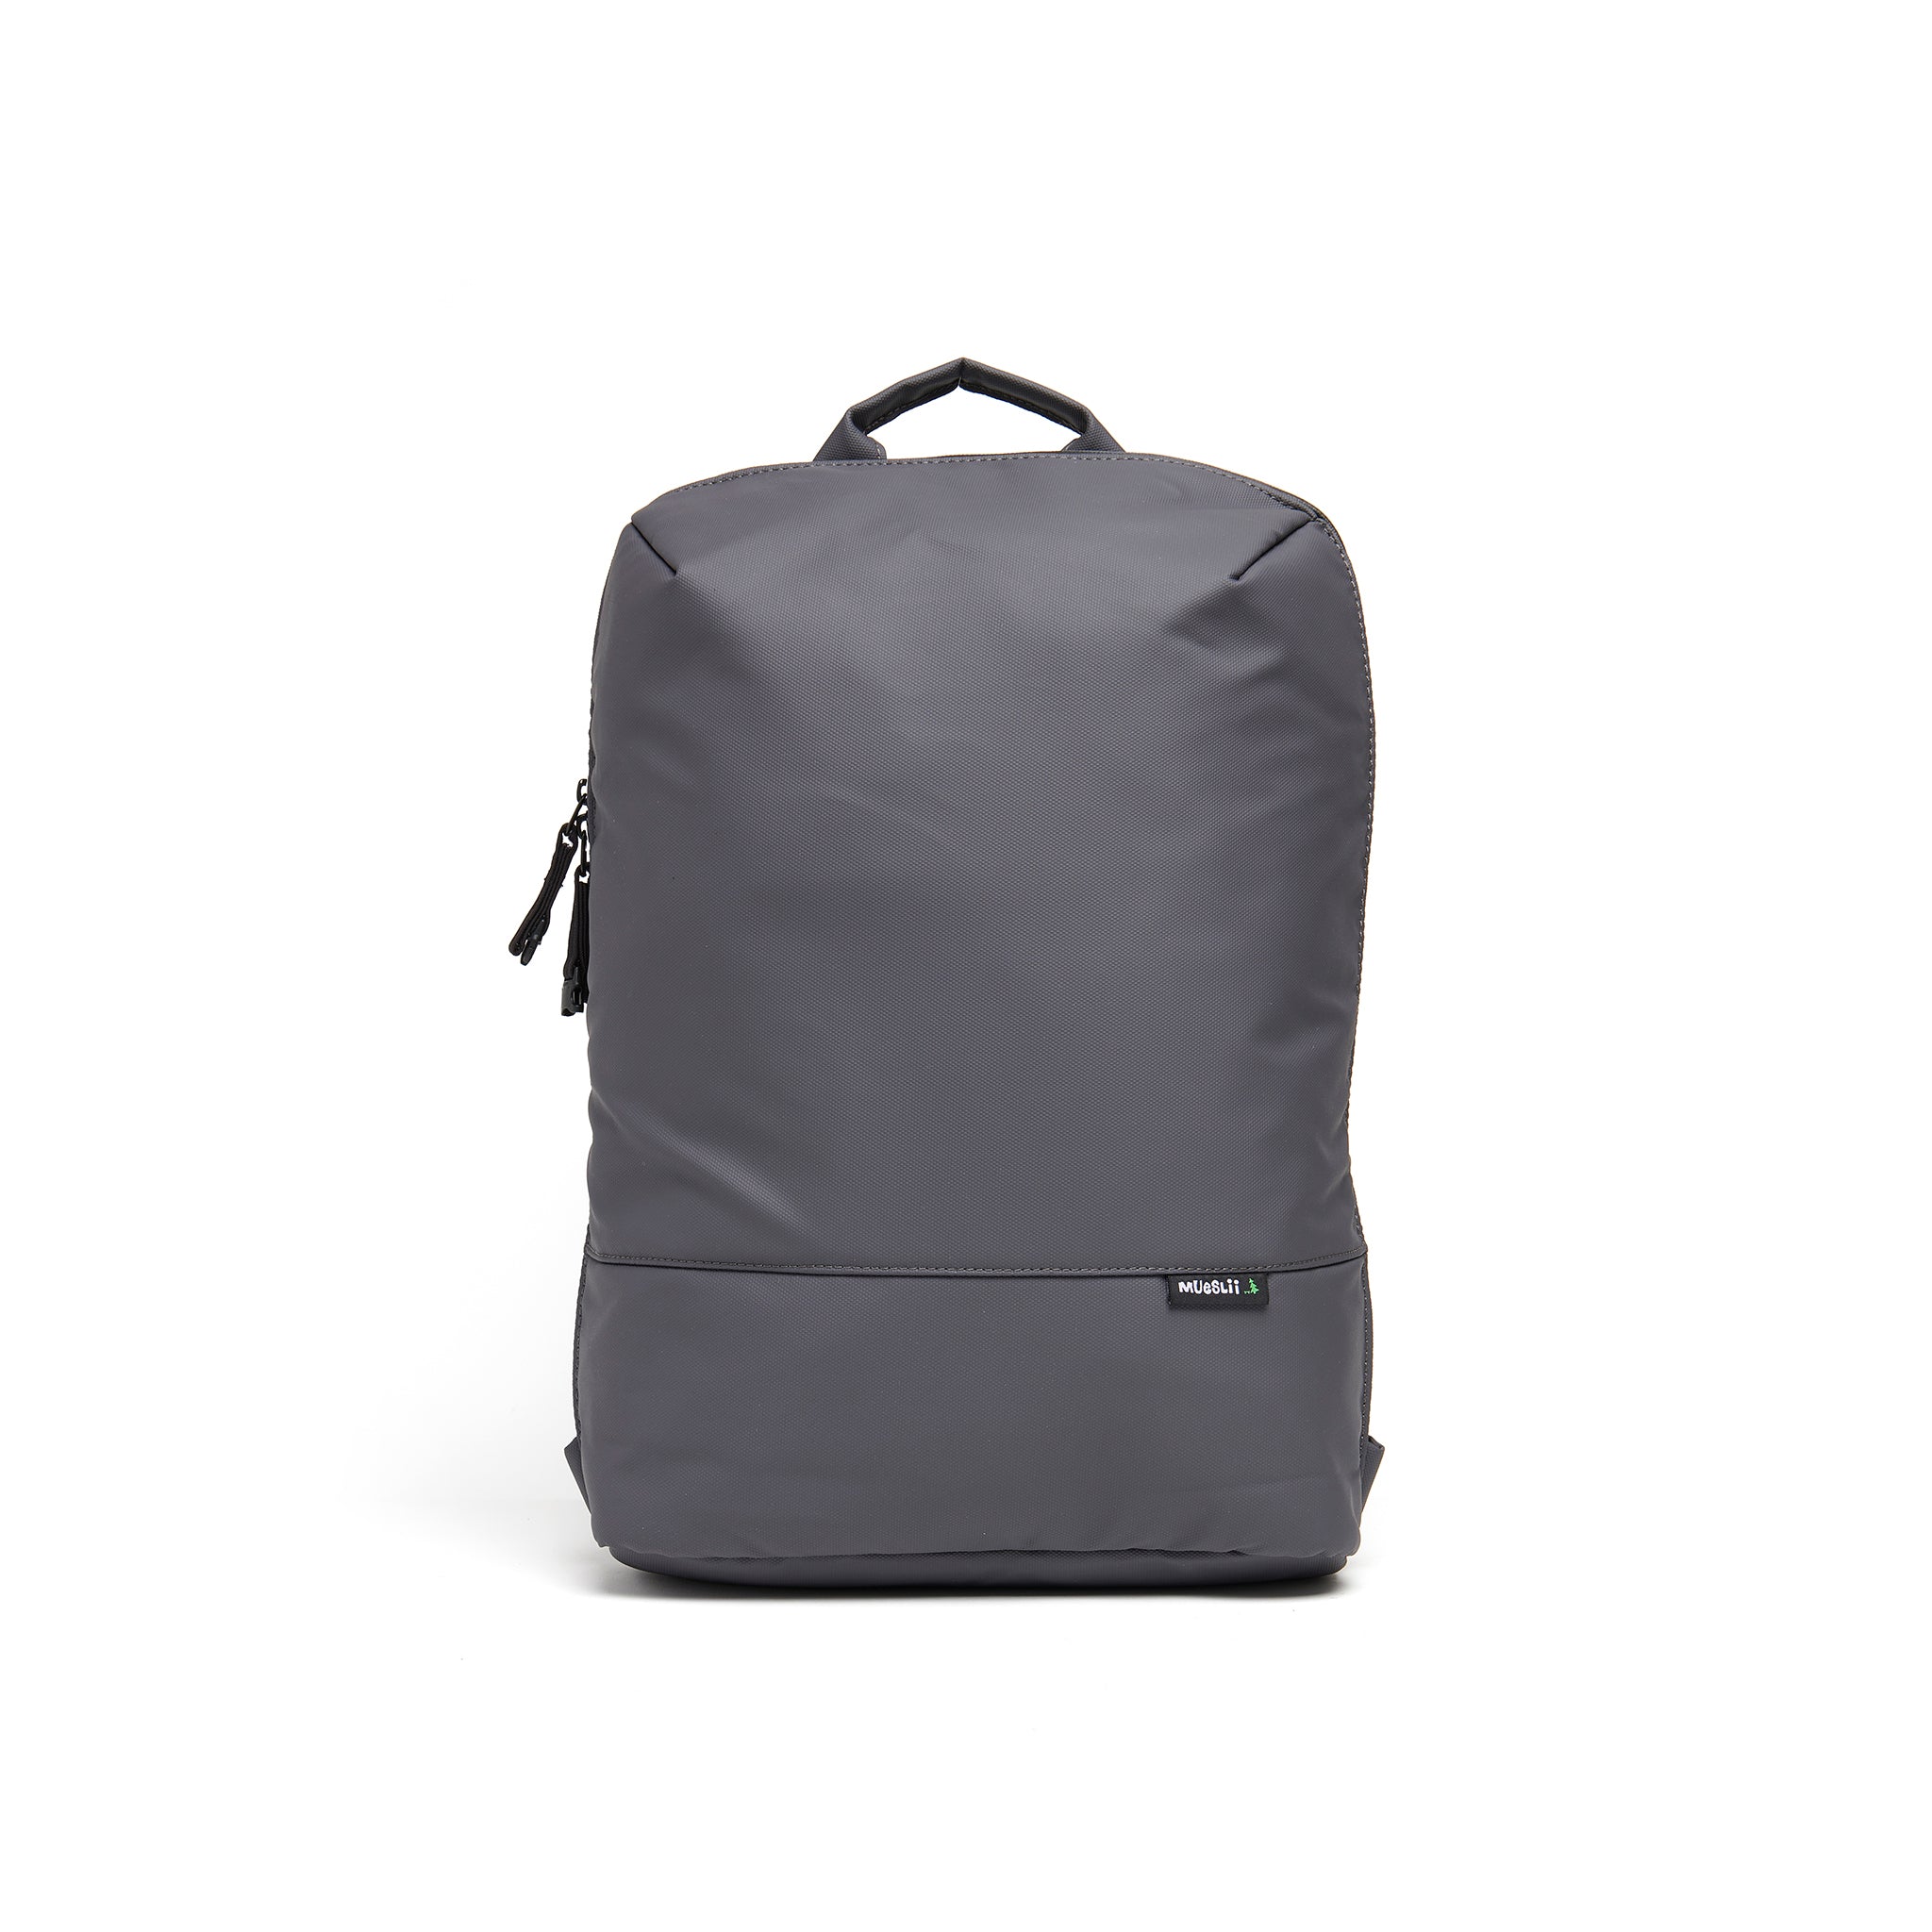 Mueslii daily backpack, made of PU coated waterproof nylon, with a laptop compartment, color grey, front view.